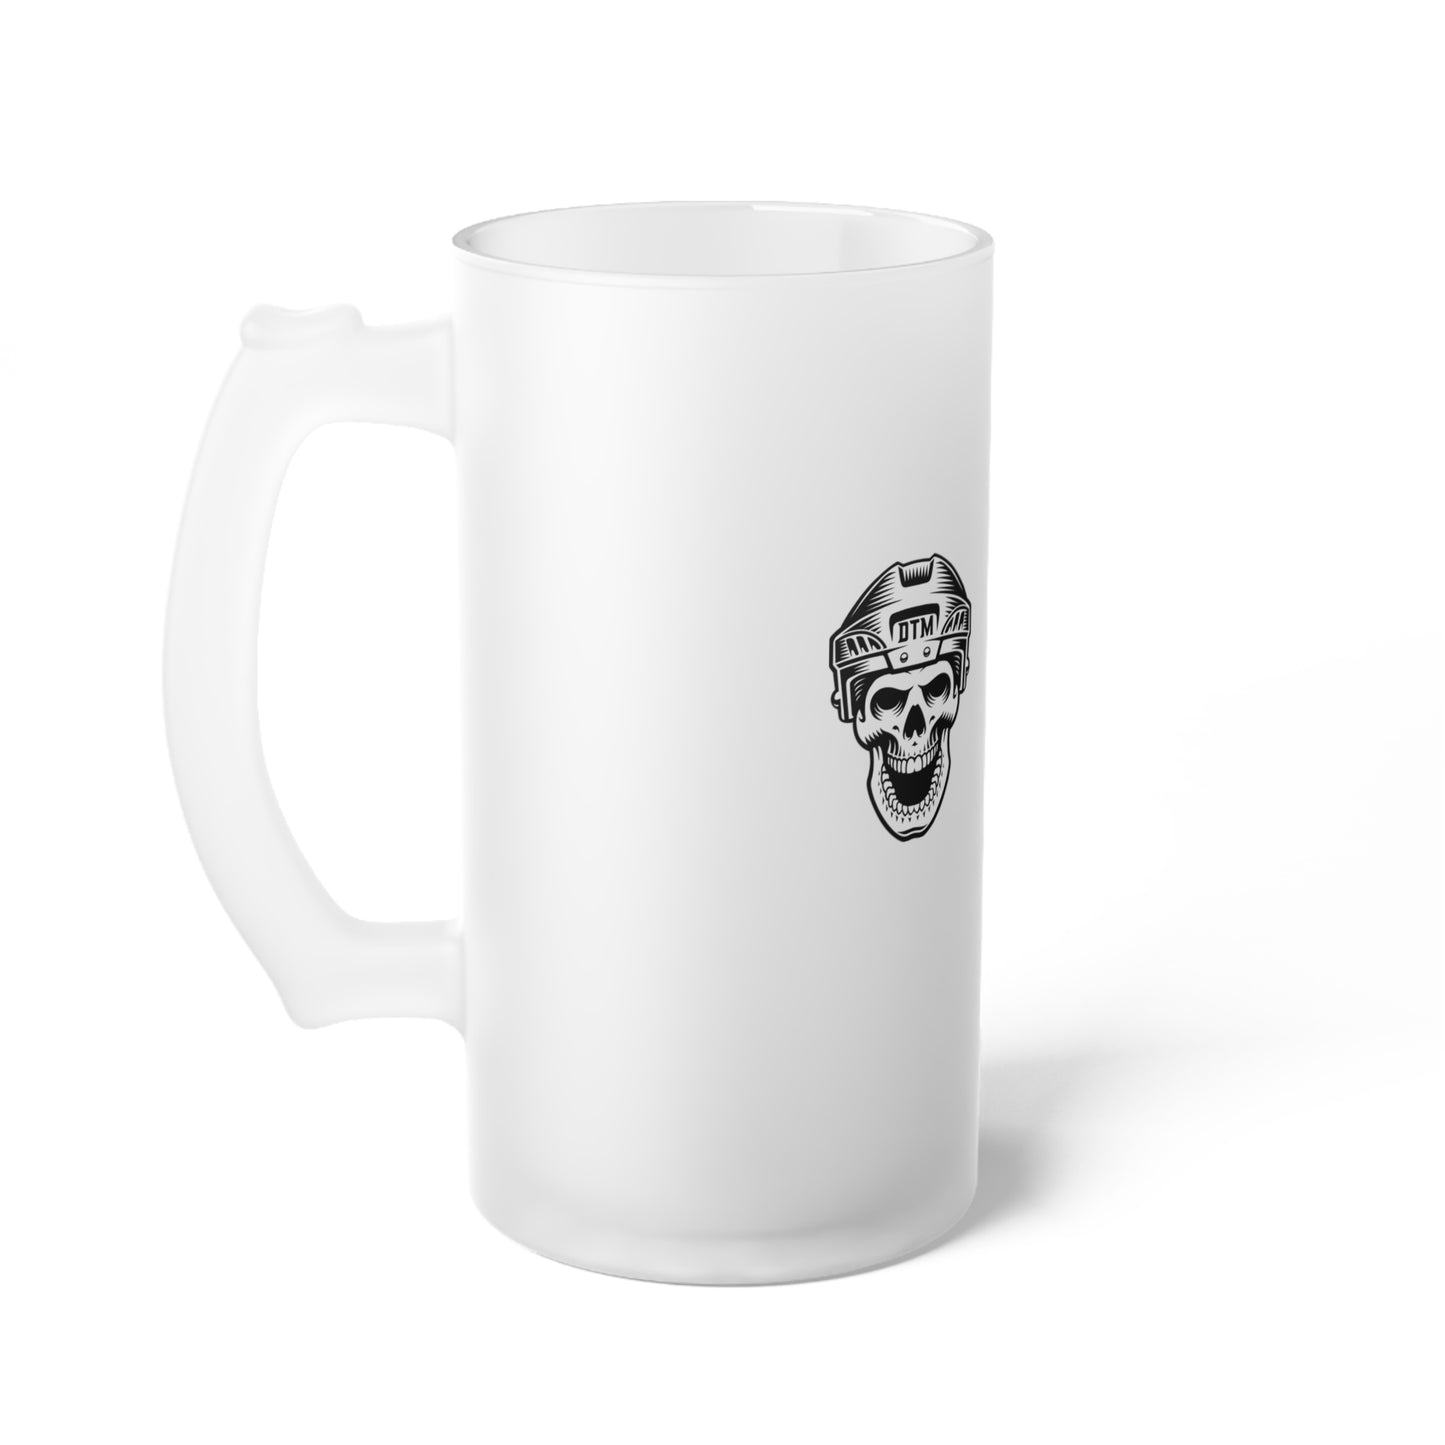 Drop The Mitts Frosted Glass Beer Mug